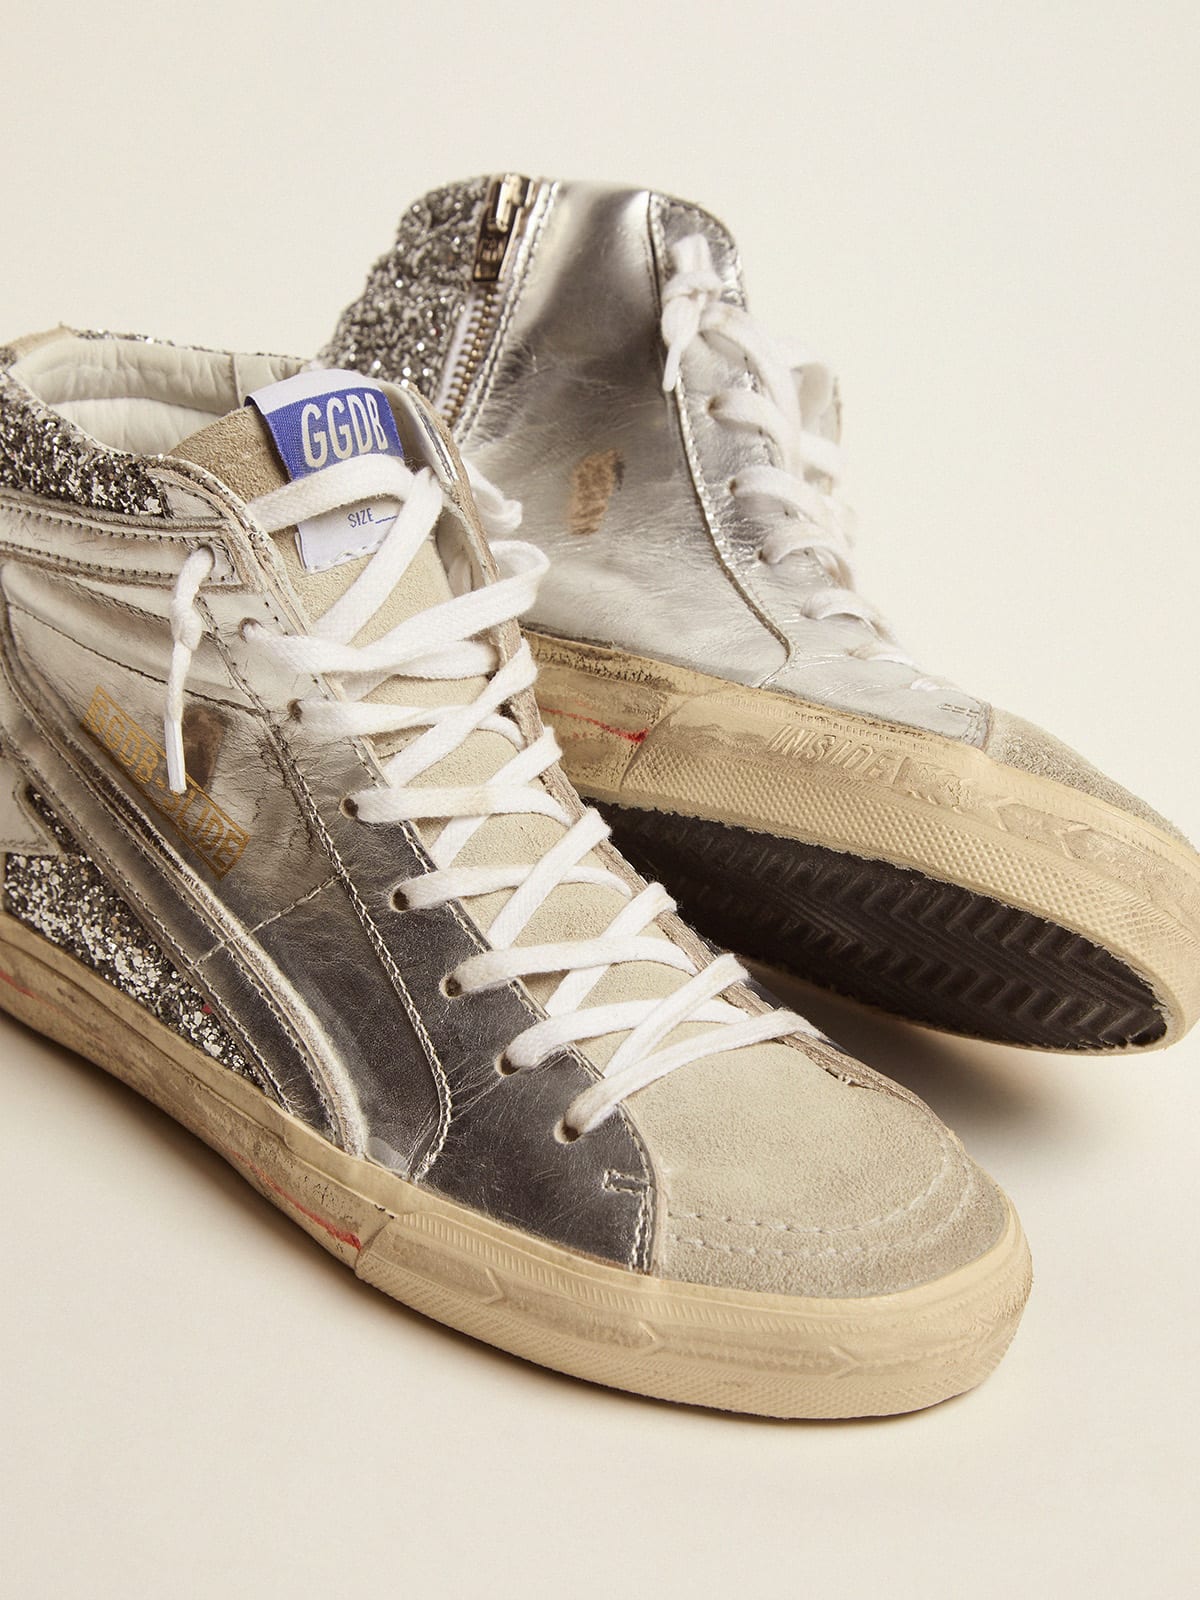 Golden Goose - Slide sneakers with upper in laminated leather and silver glitter in 